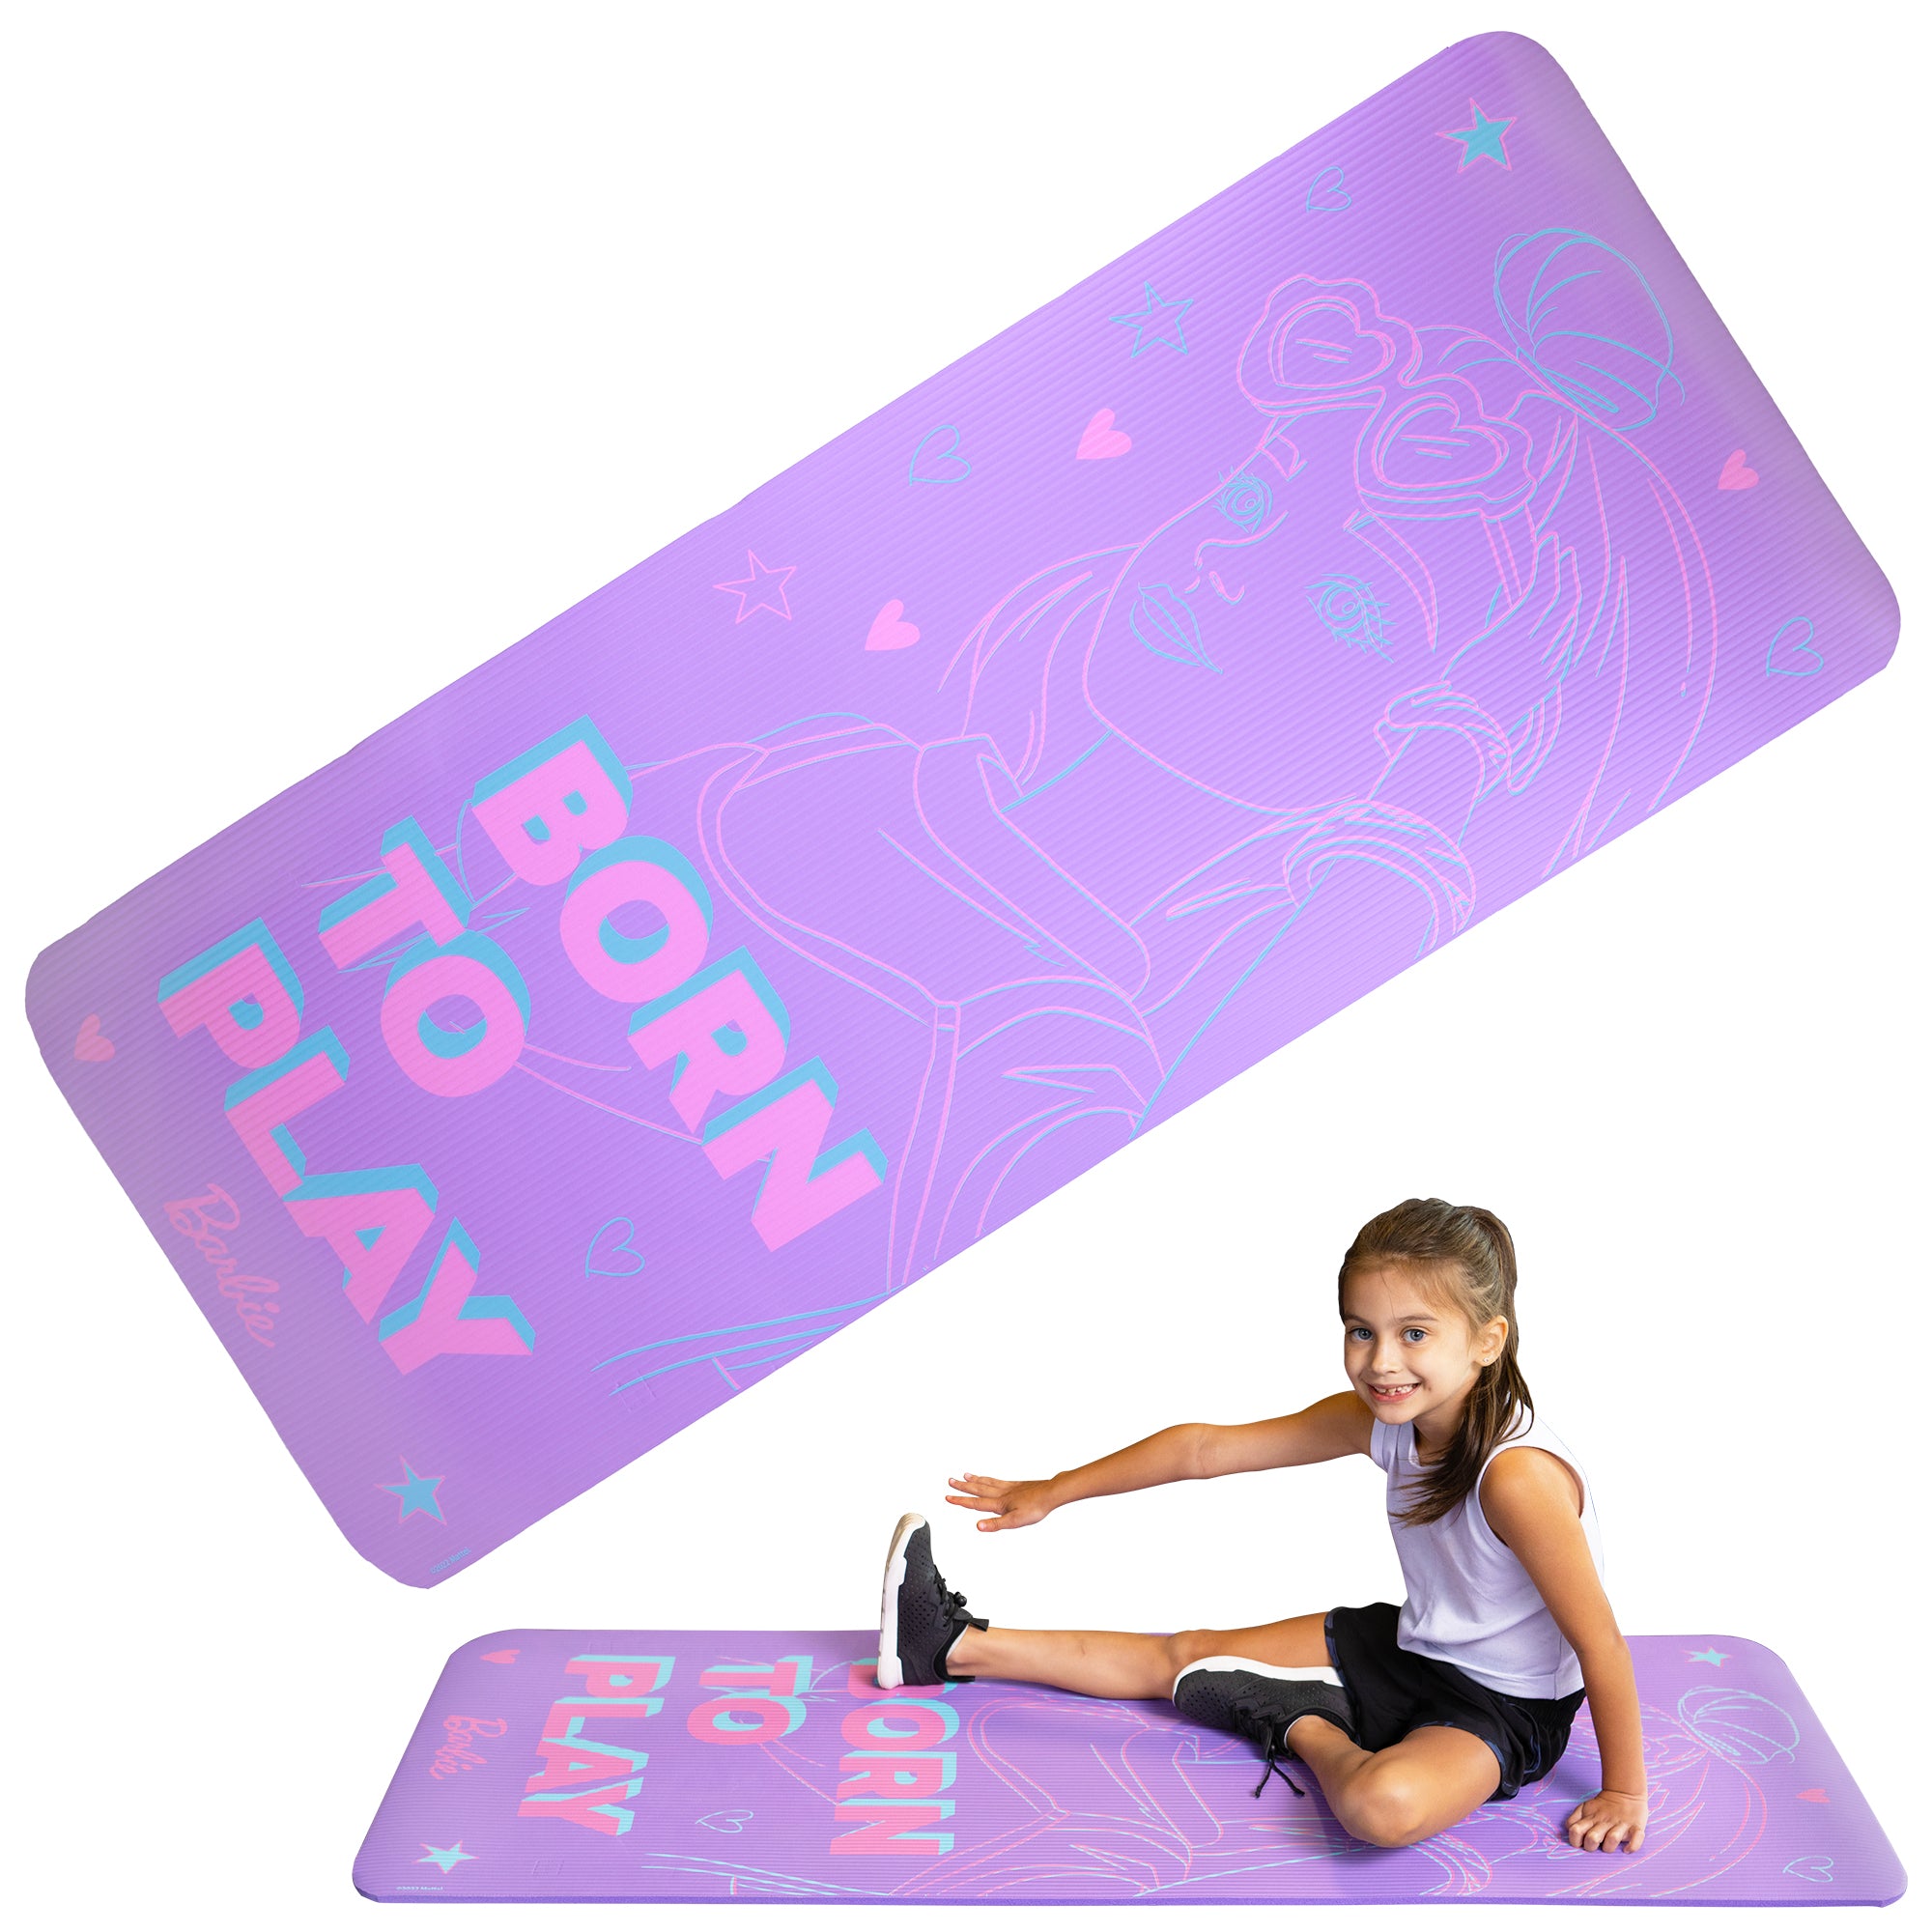 BARBIE YOGA MAT EXERCISE BALL WATER FITS FASHIONISTA INTEGRITY MY SCENE MTM  DOLL